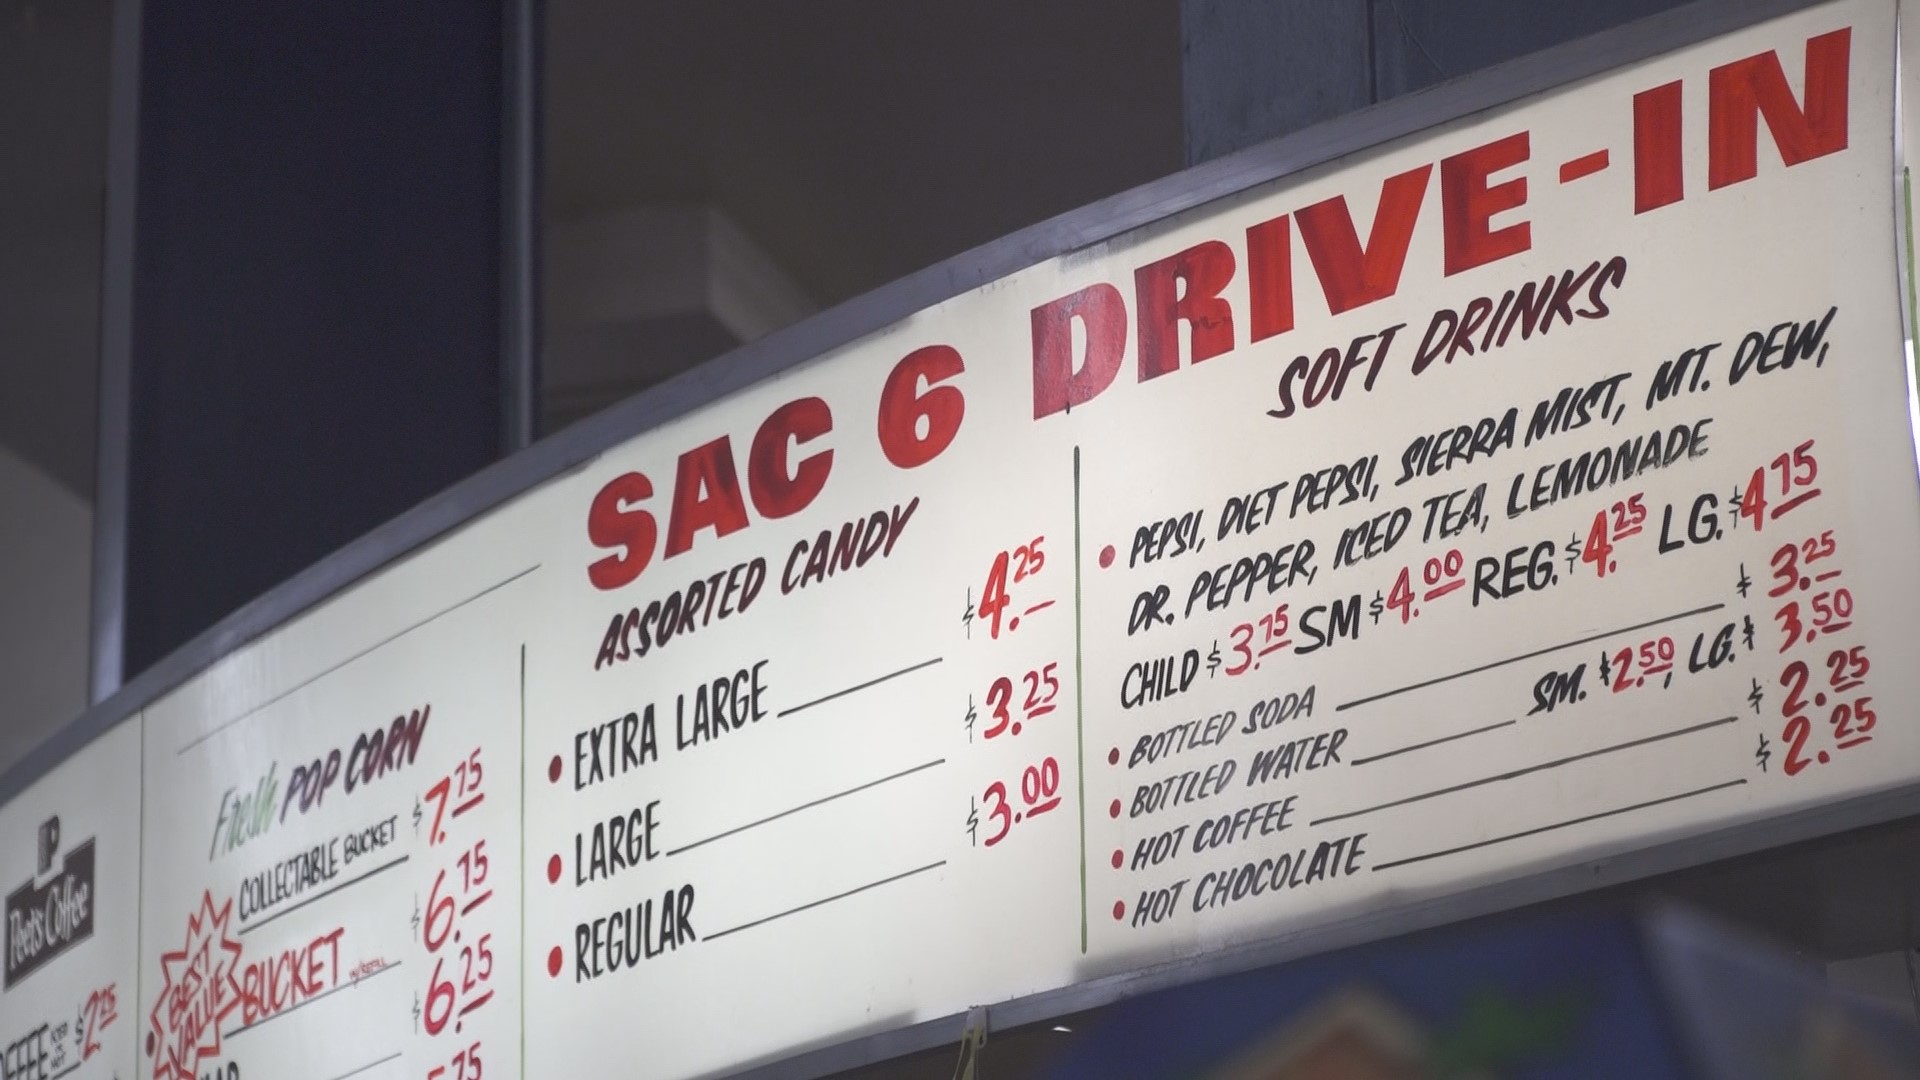 Sacramento's only drive-in theater is going through major renovations that include new asphalt lots and bathrooms. The $1-million project is expected to be finished by the end of June.